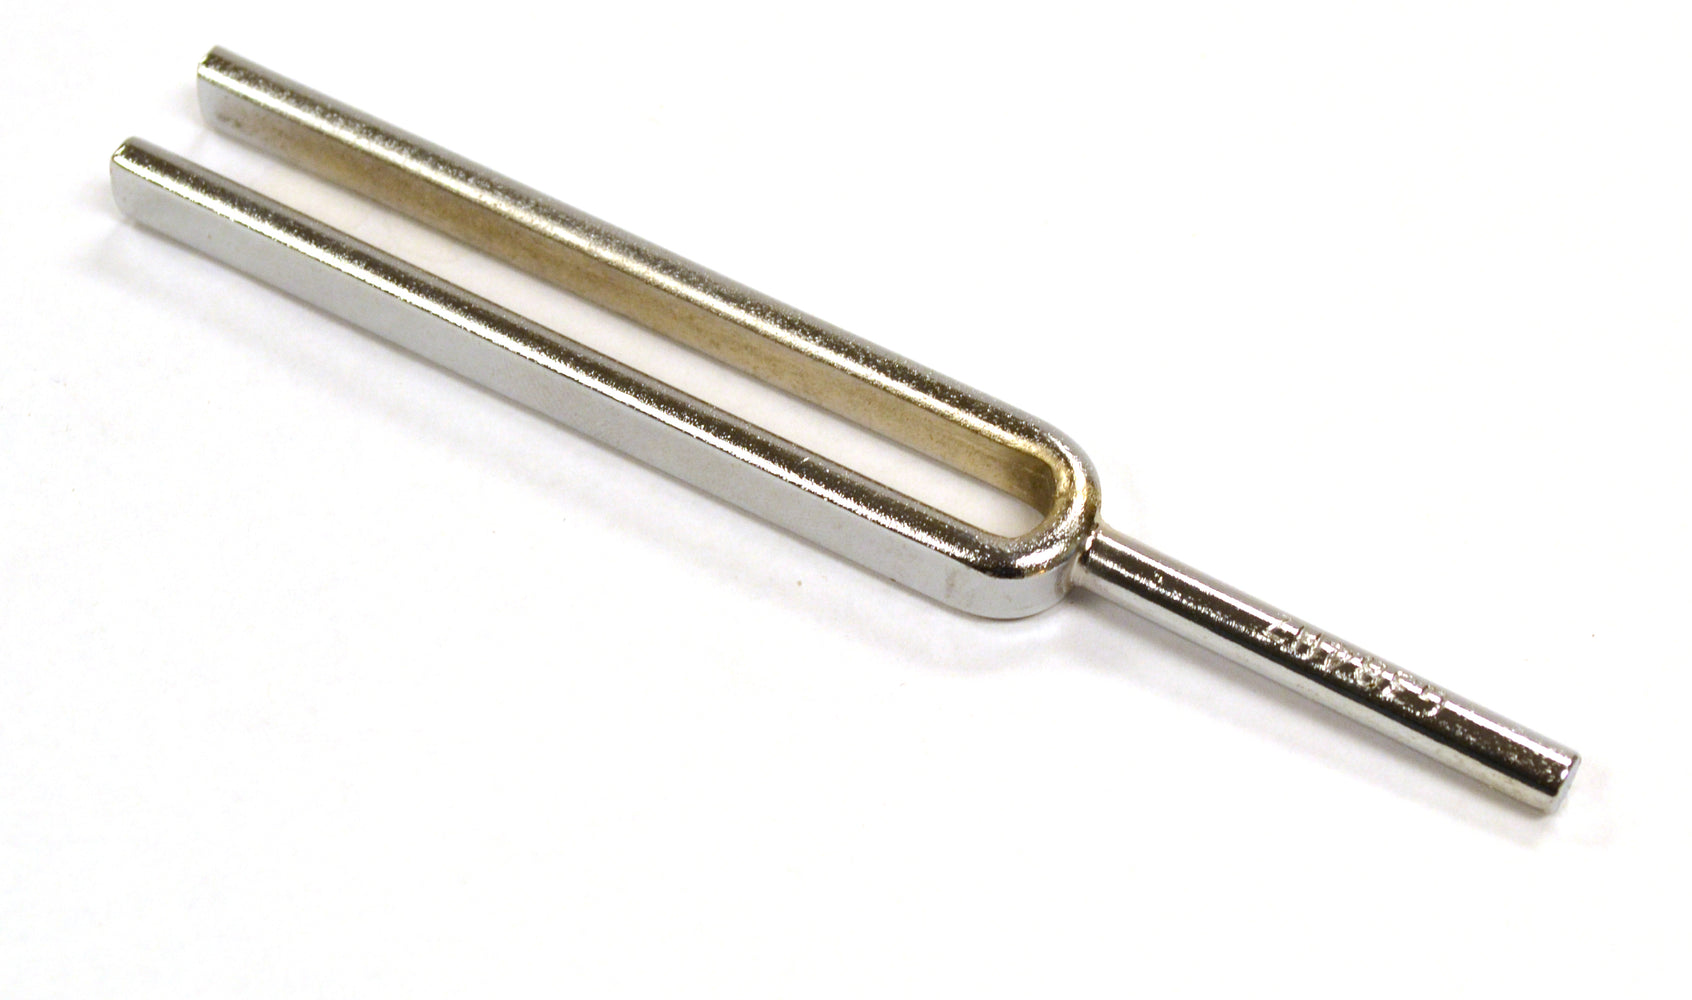 Steel Tuning Fork, 512Hz Frequency (±5%) - Designed for Physics Experimentation - Chrome Plated Steel - Eisco Labs